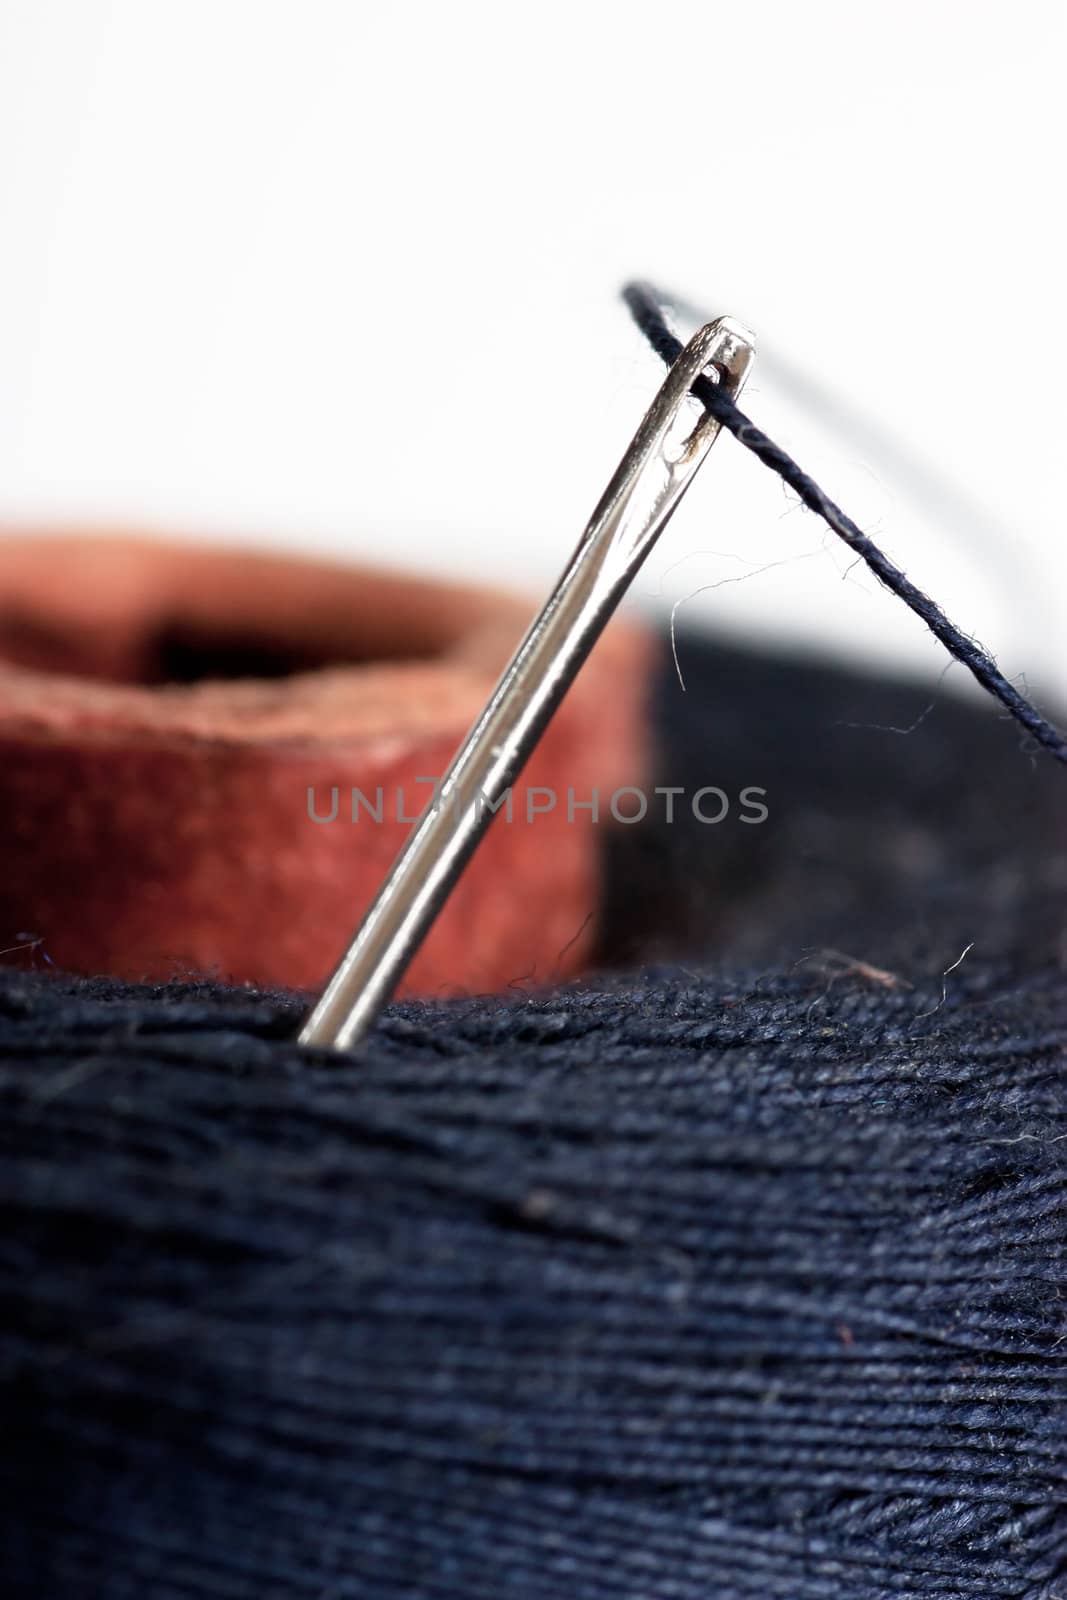 Needle and thread by AGorohov